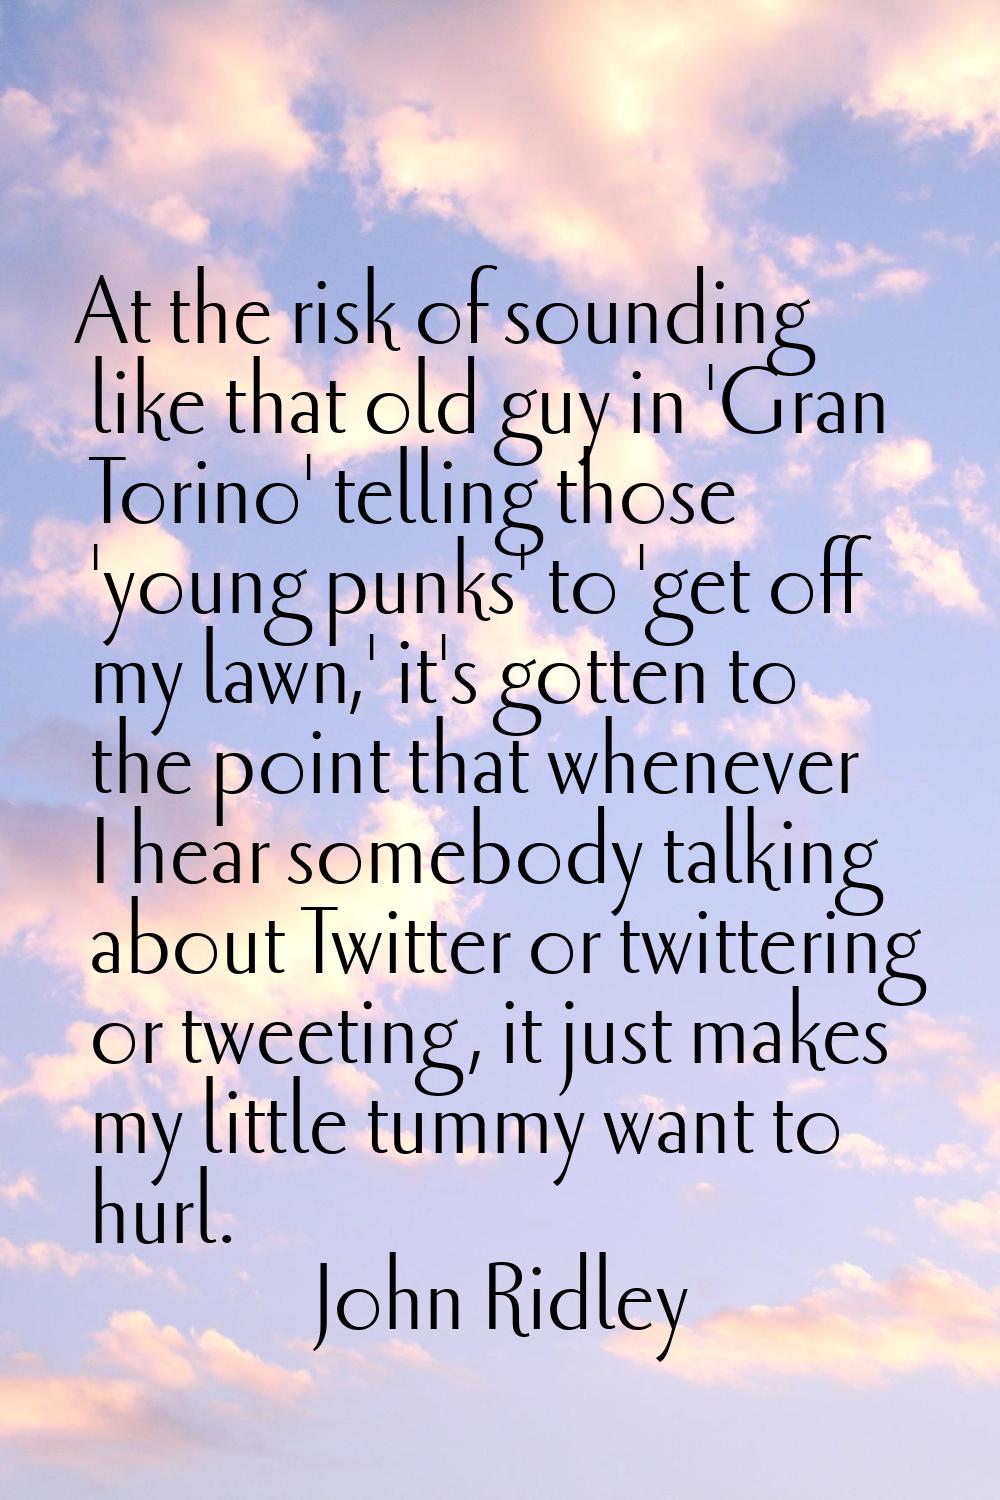 At the risk of sounding like that old guy in 'Gran Torino' telling those 'young punks' to 'get off 